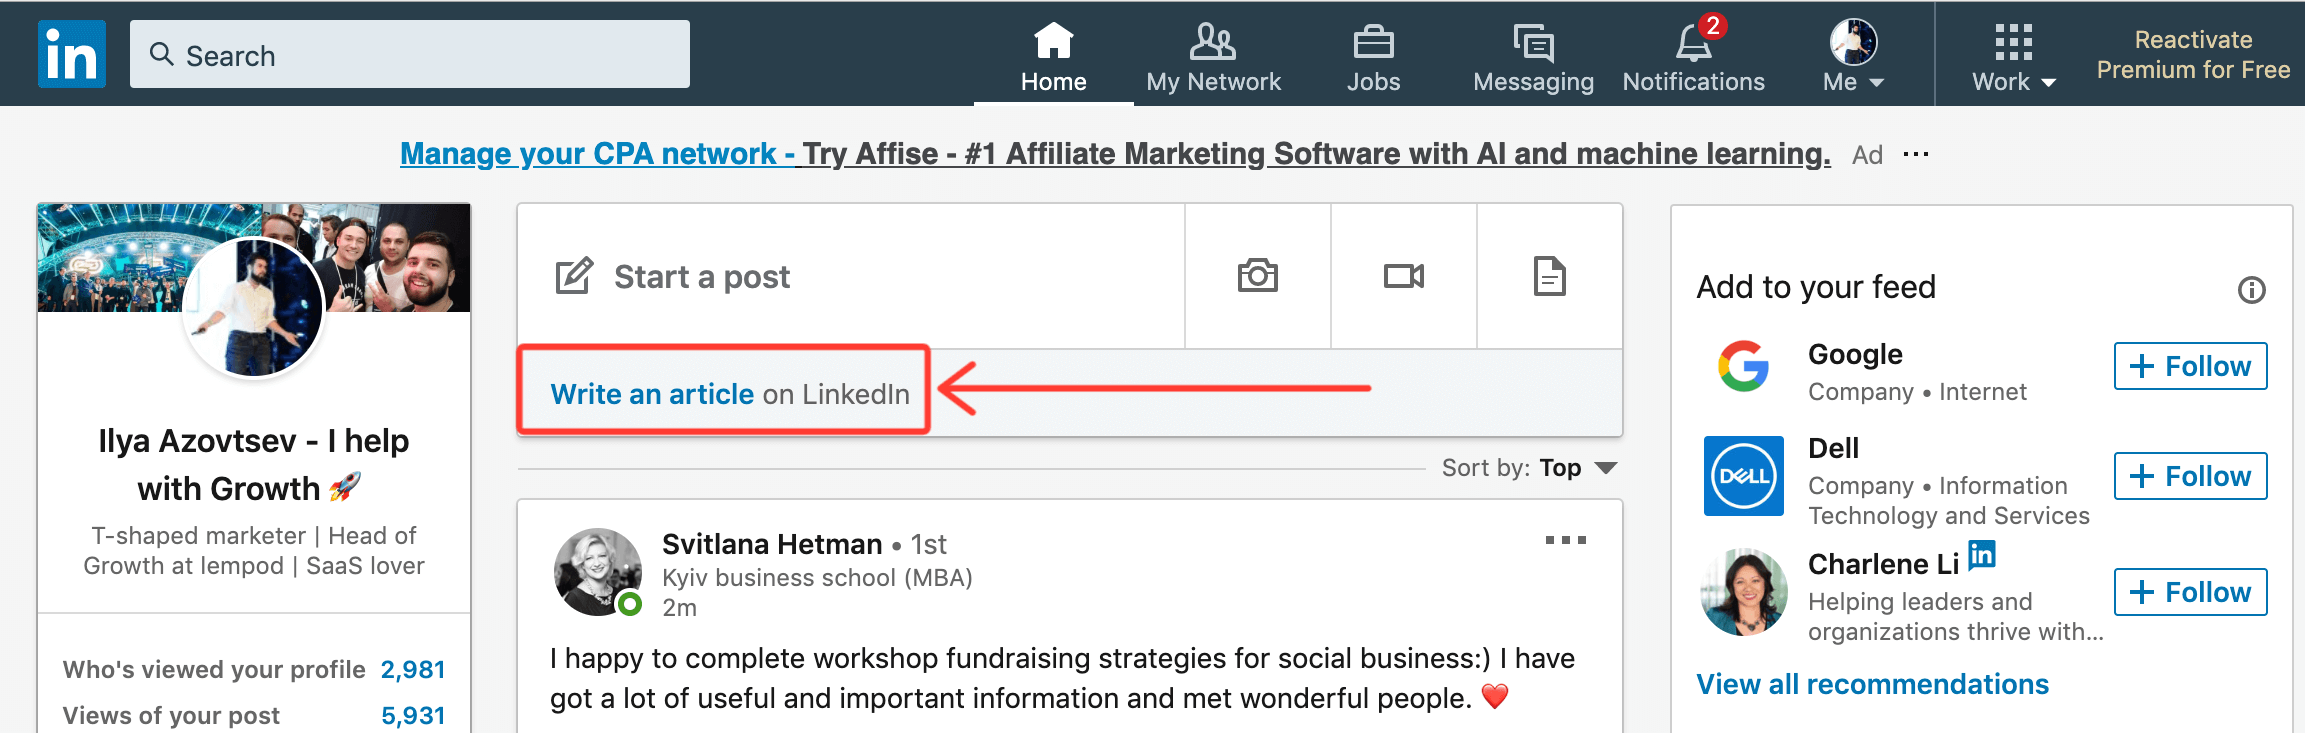 How to write an article on LinkedIn